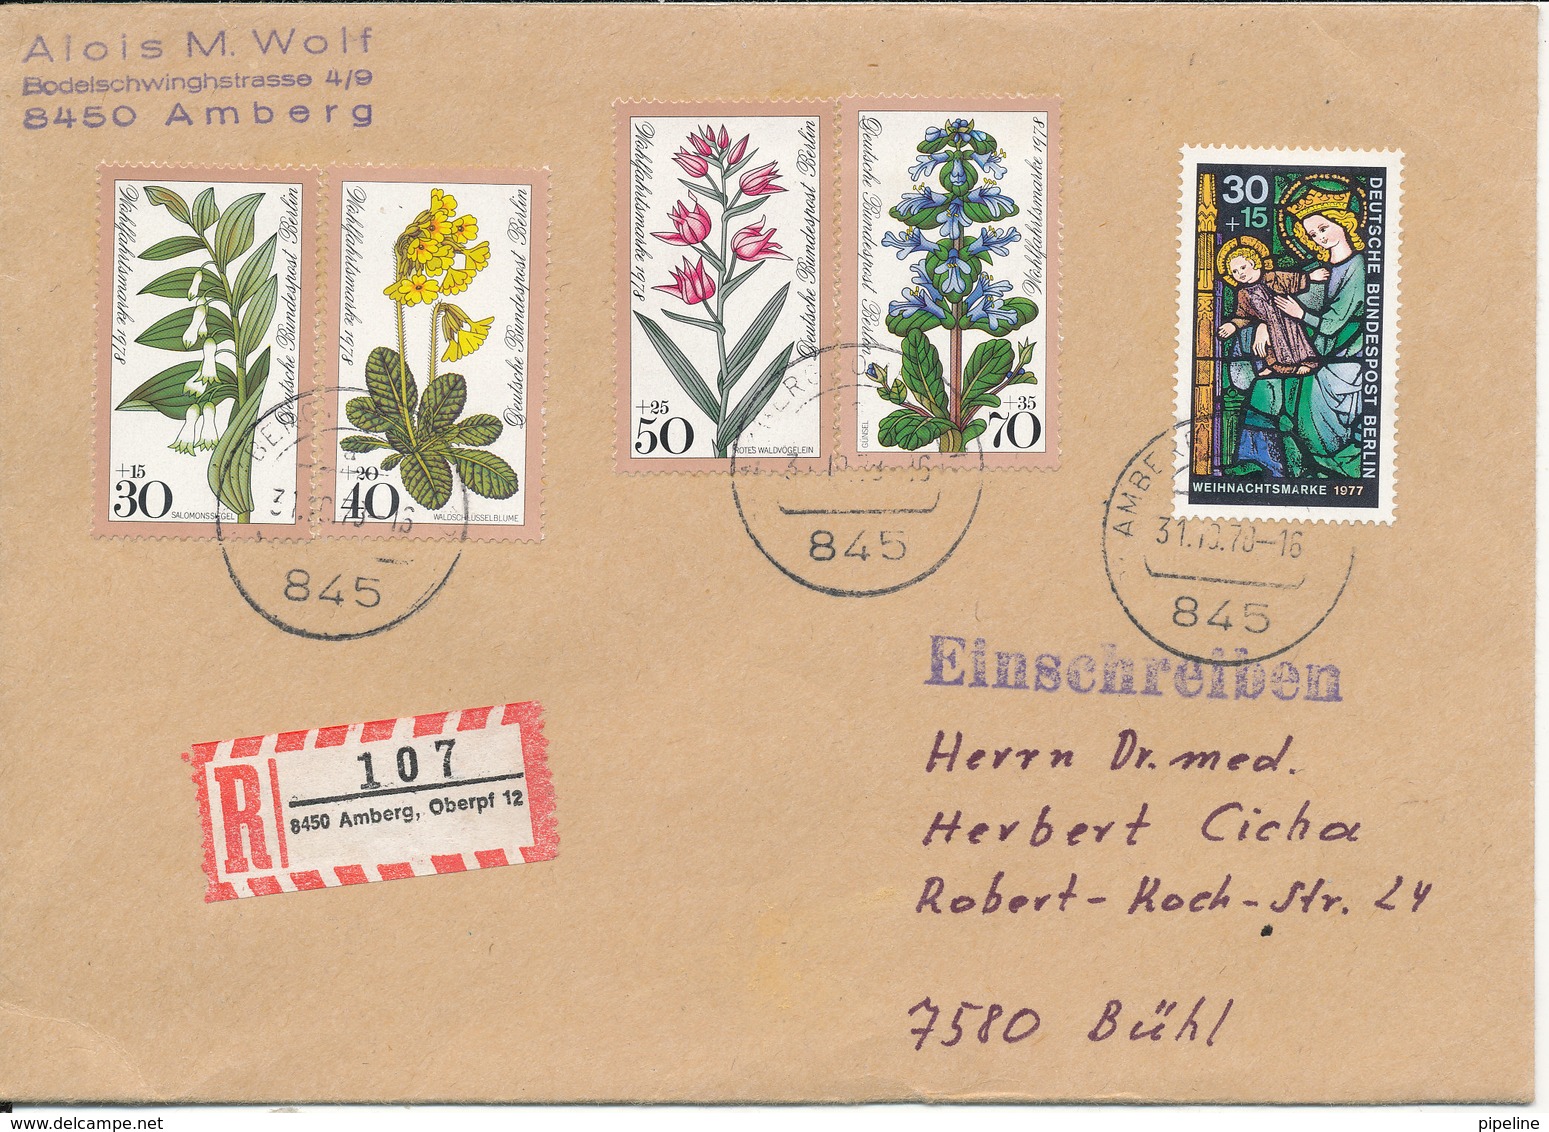 Germany Berlin Registered Cover Amberg Oberpf. 31-10-1978 Sent To Bühl With More Topic Stamps - Covers & Documents